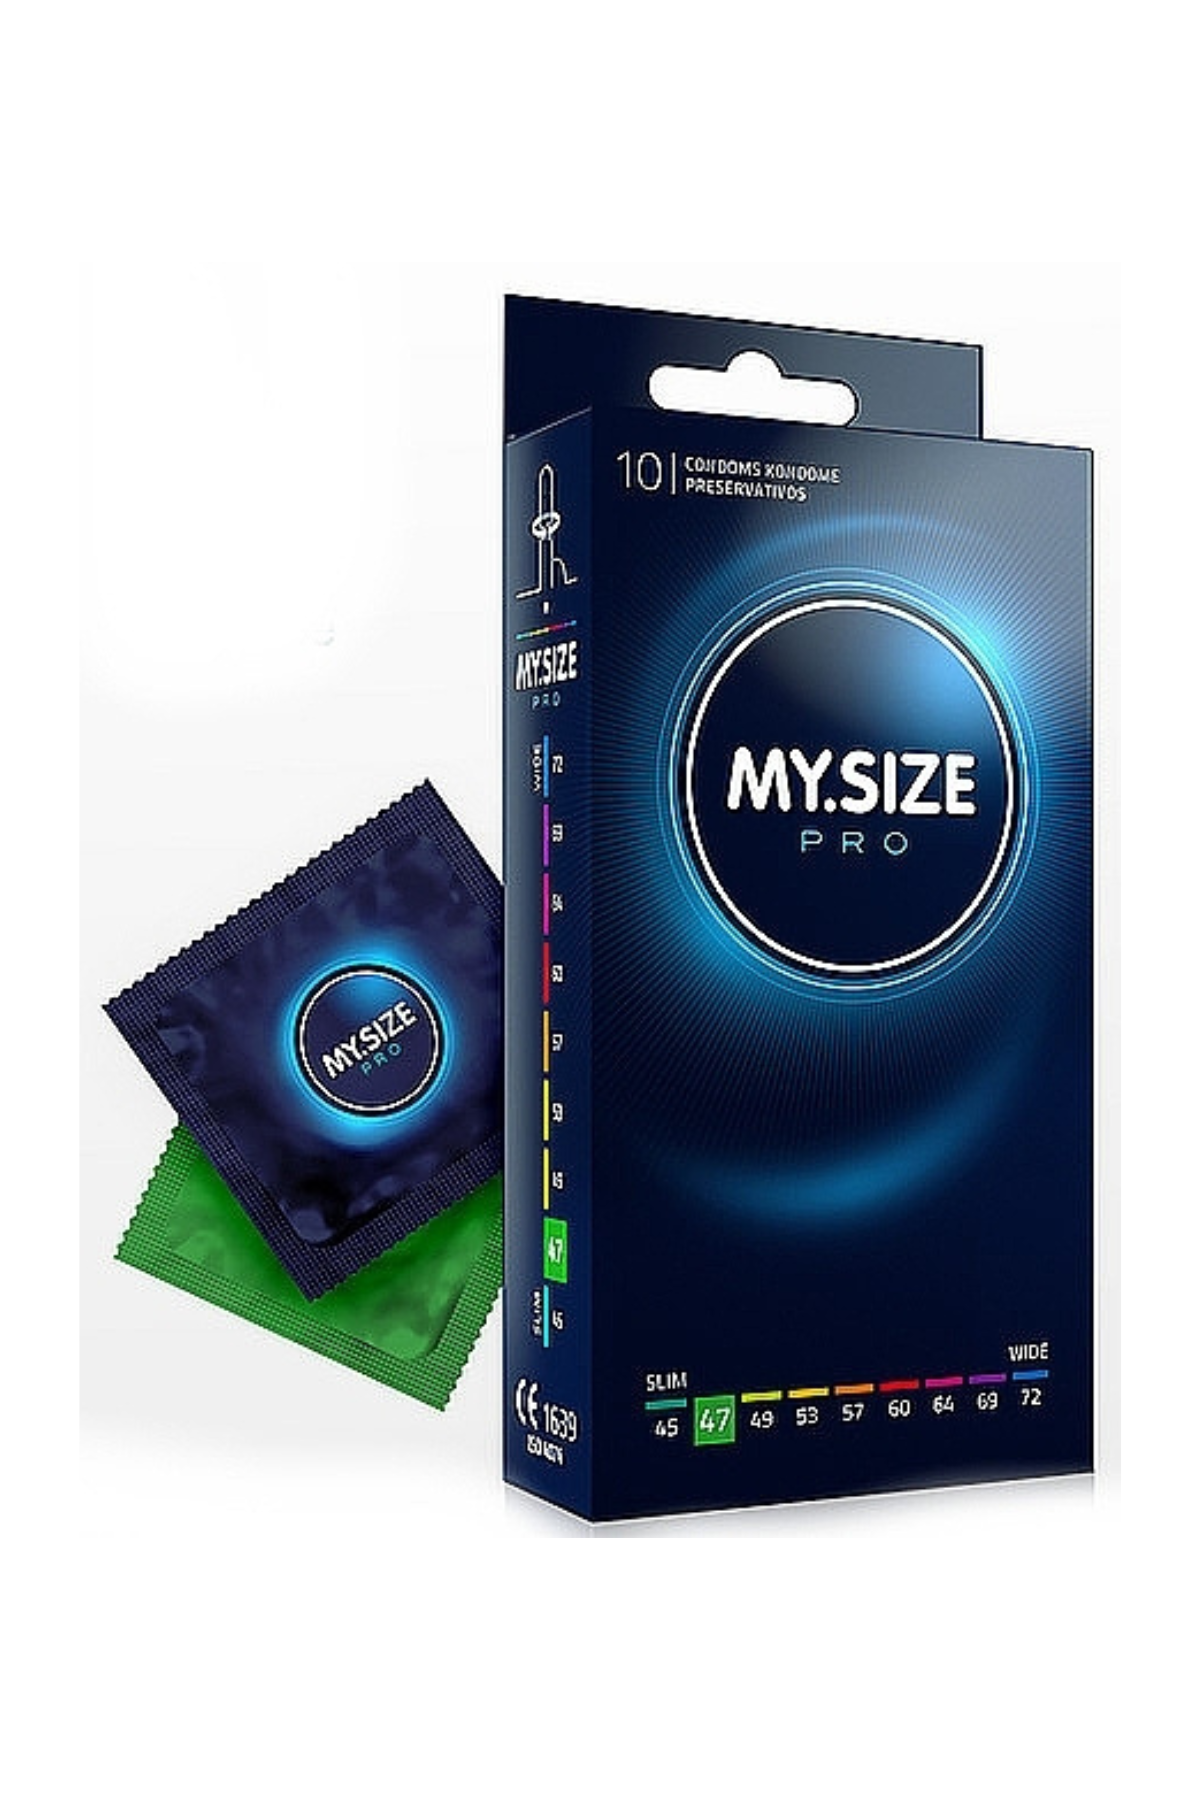 MY.SIZE Pro 47mm Condoms | 10 Pack